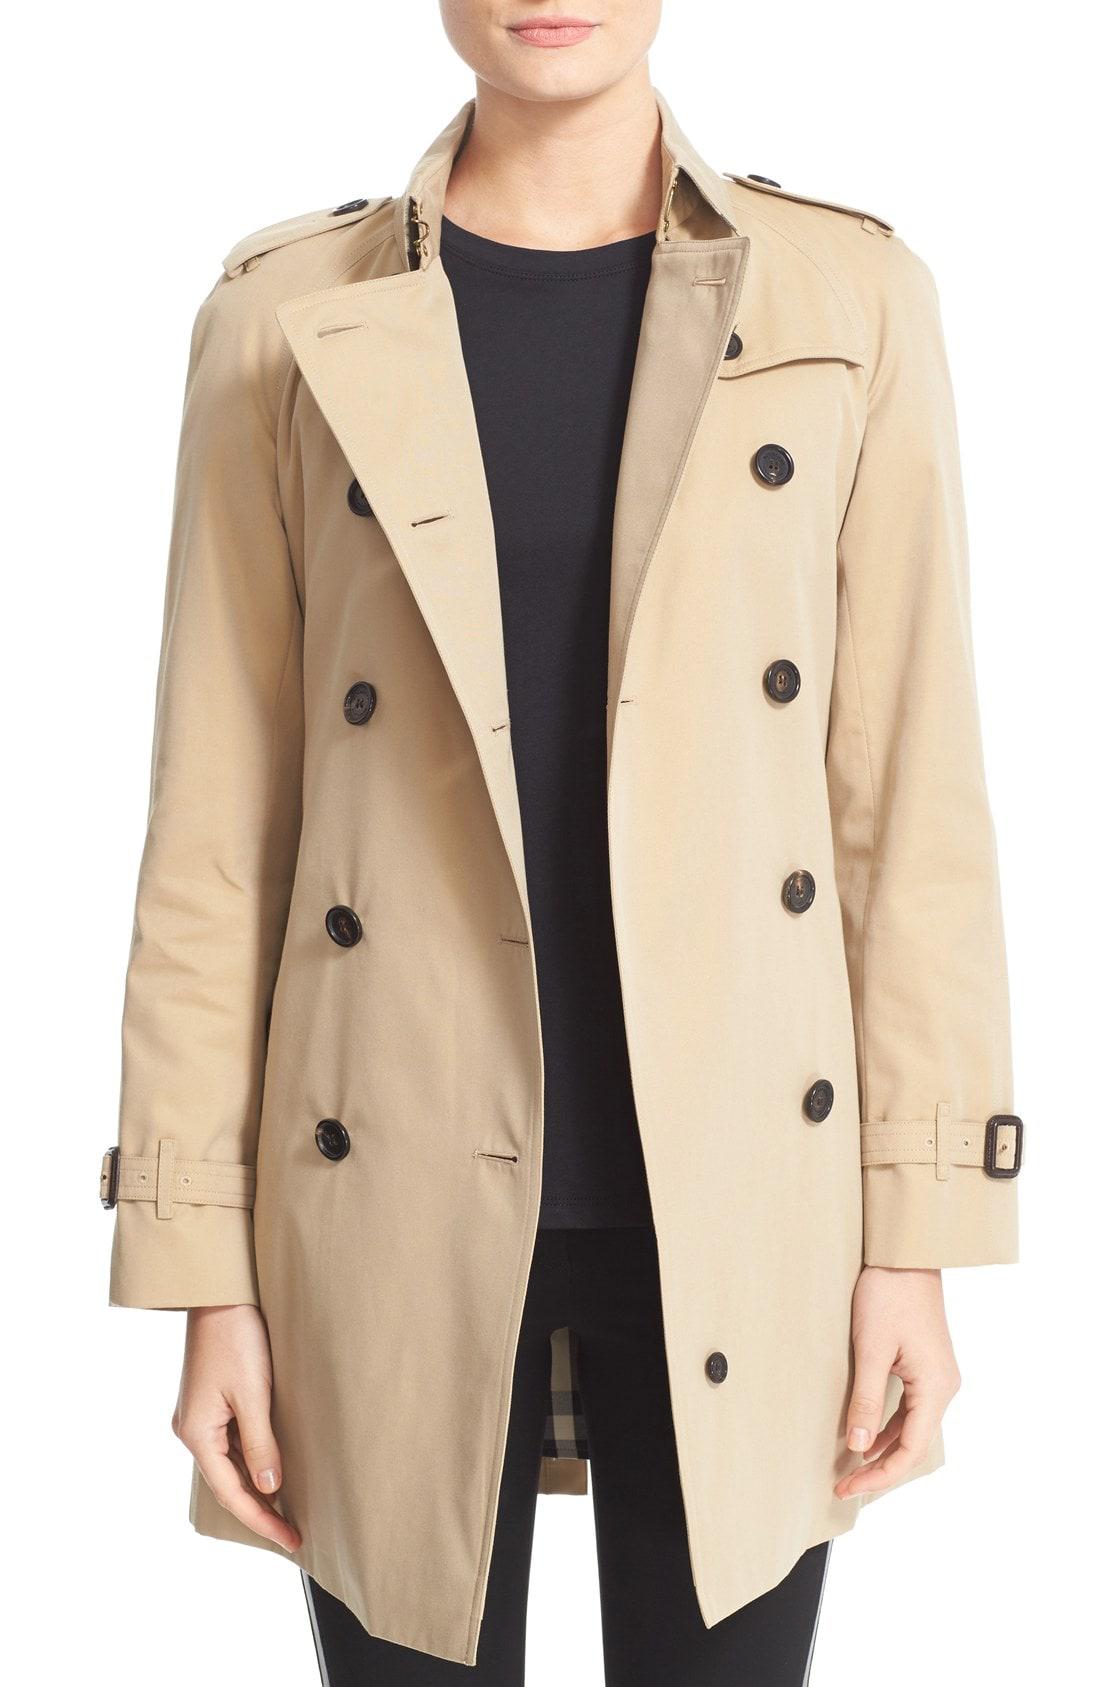 Lyst - Burberry 'westminster' Double Breasted Trench Coat in Natural